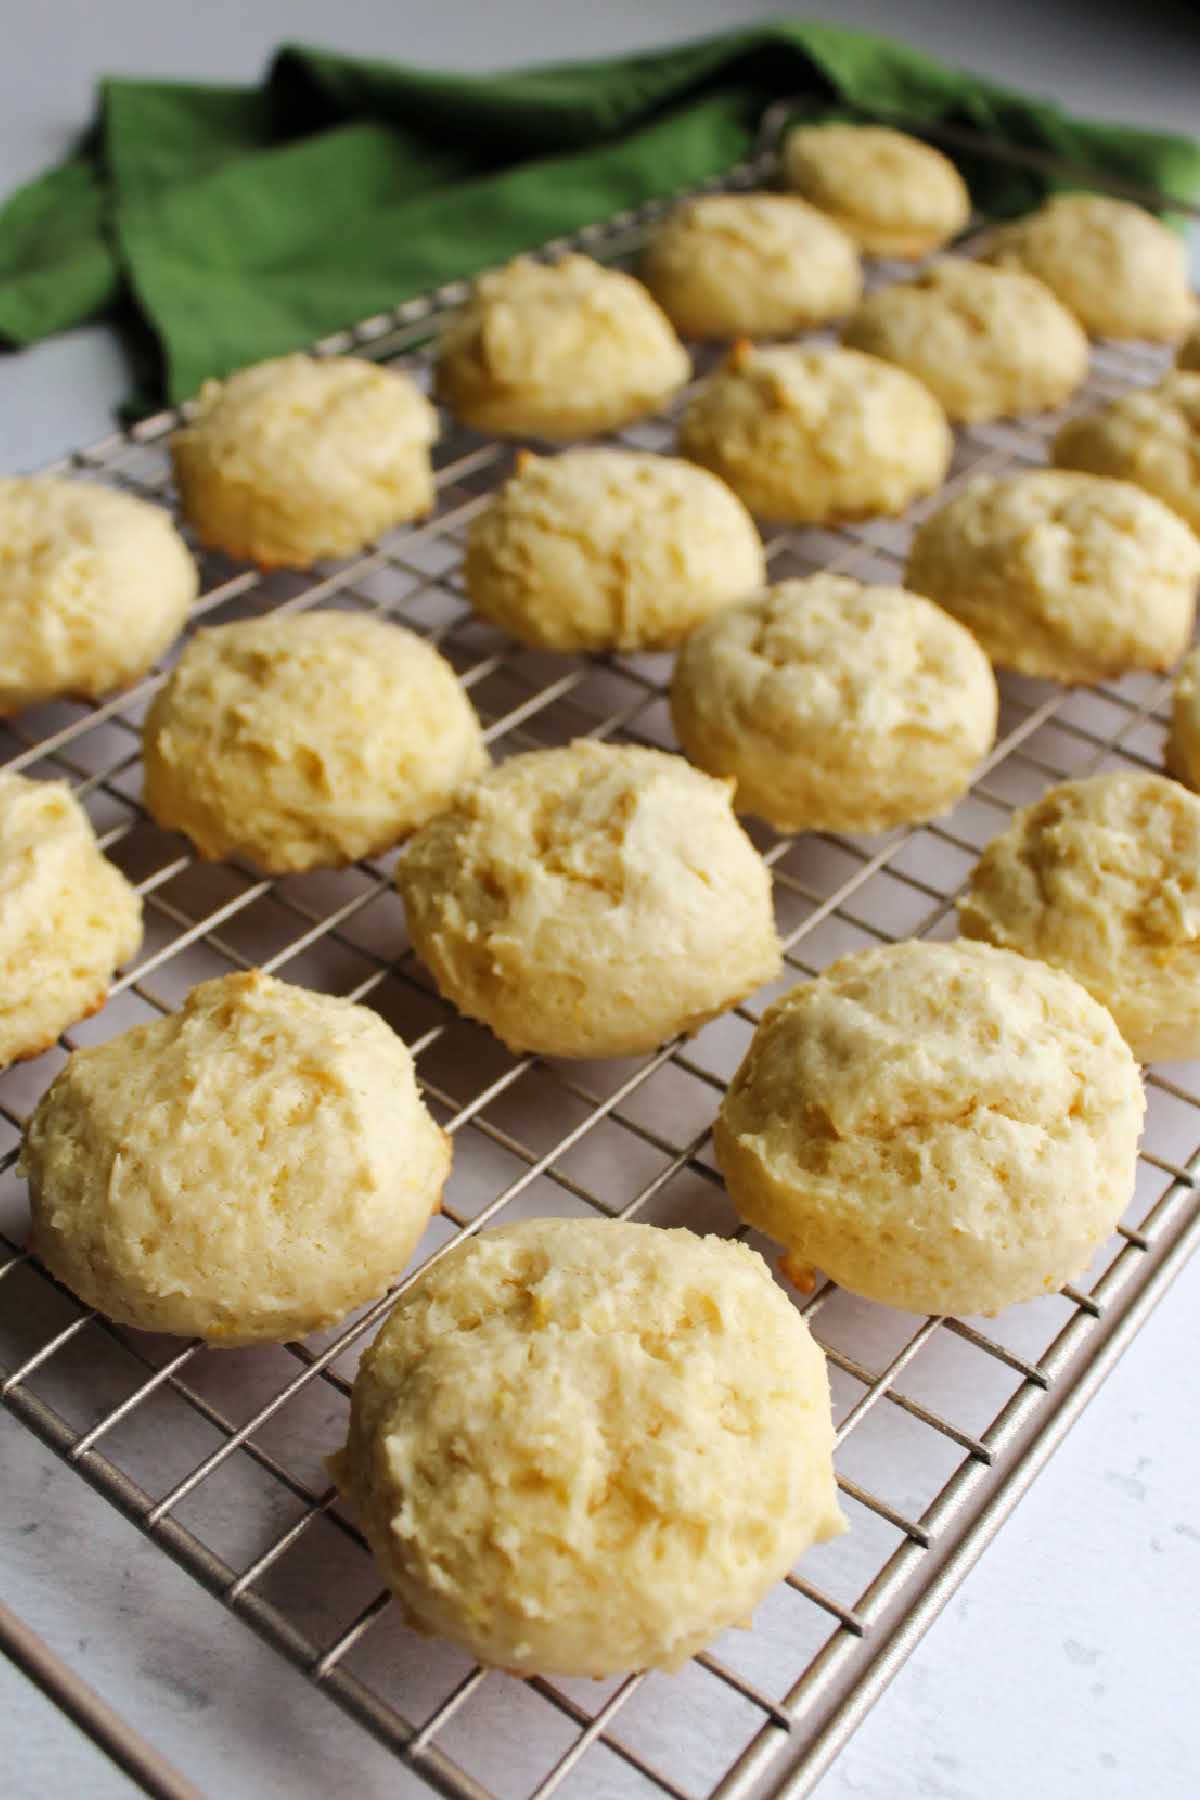 Puffy lemon cookies on wire cooling rack.